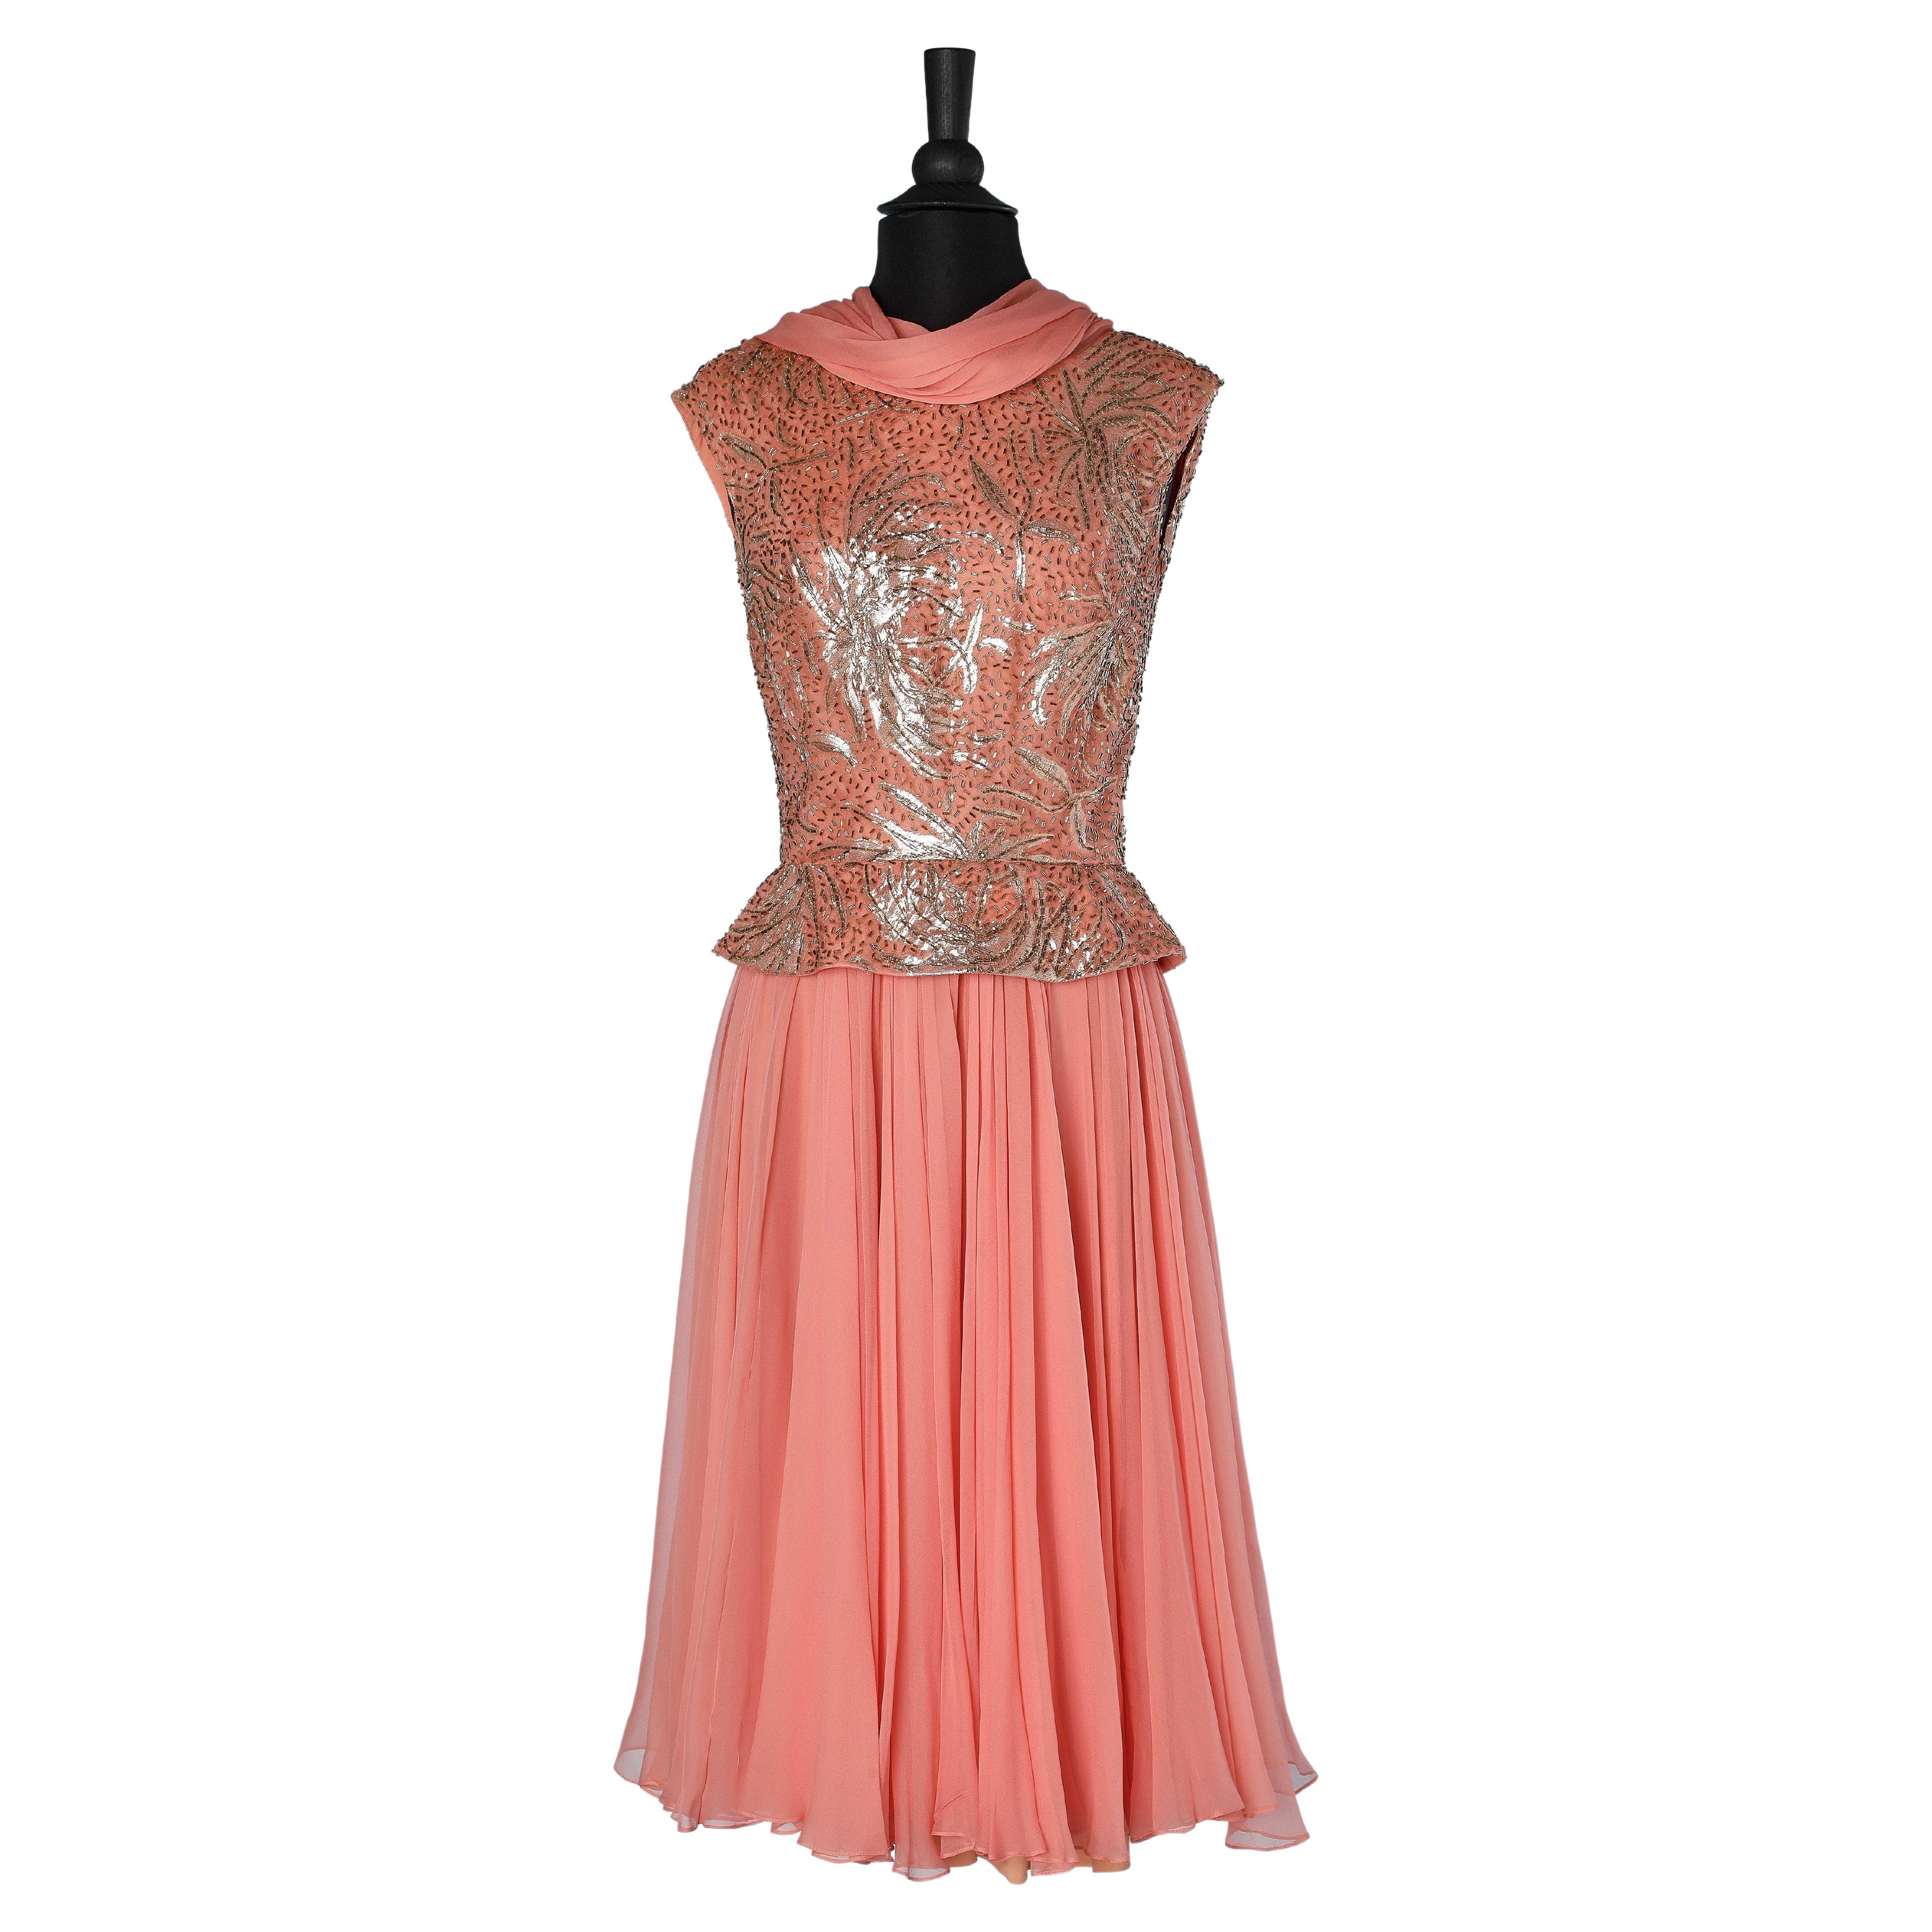 Salmon pink chiffon dress and beaded lurex Pat Sandler for Hightlight For Sale